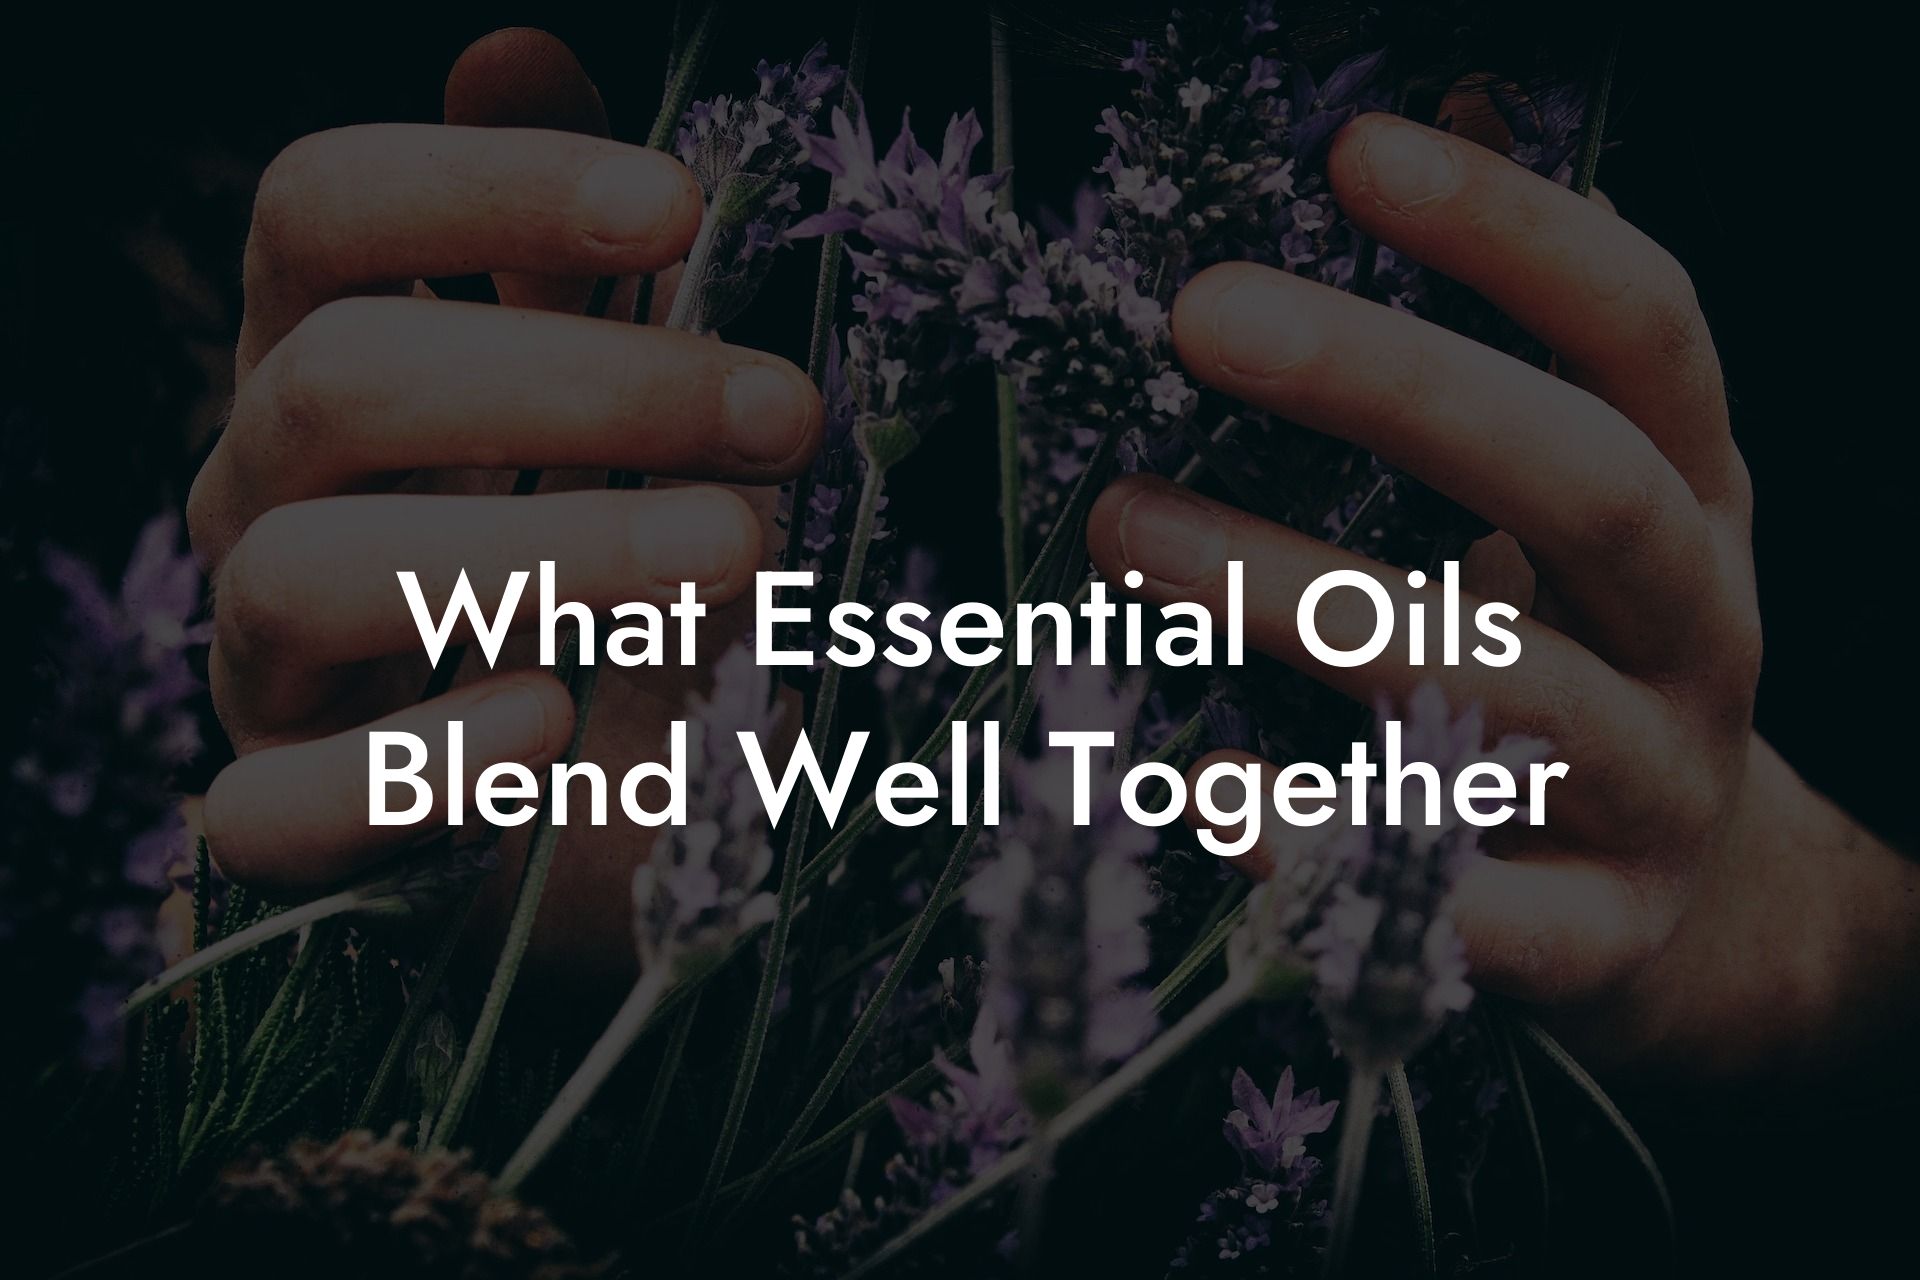 What Essential Oils Blend Well Together